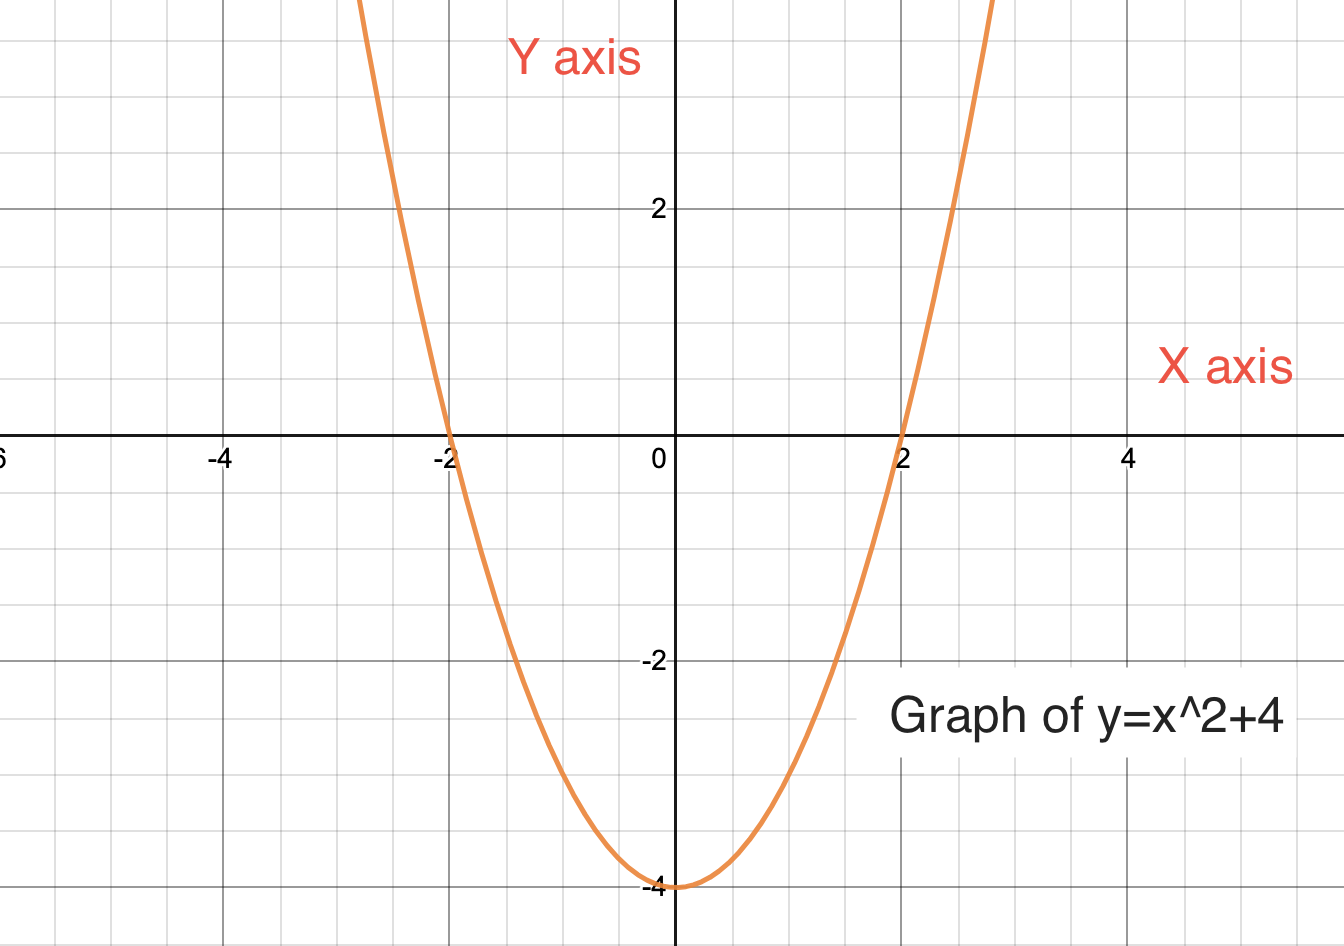 Step 1 to learning calculus is graph plotting. The graph shows the graph of y=x^2+4